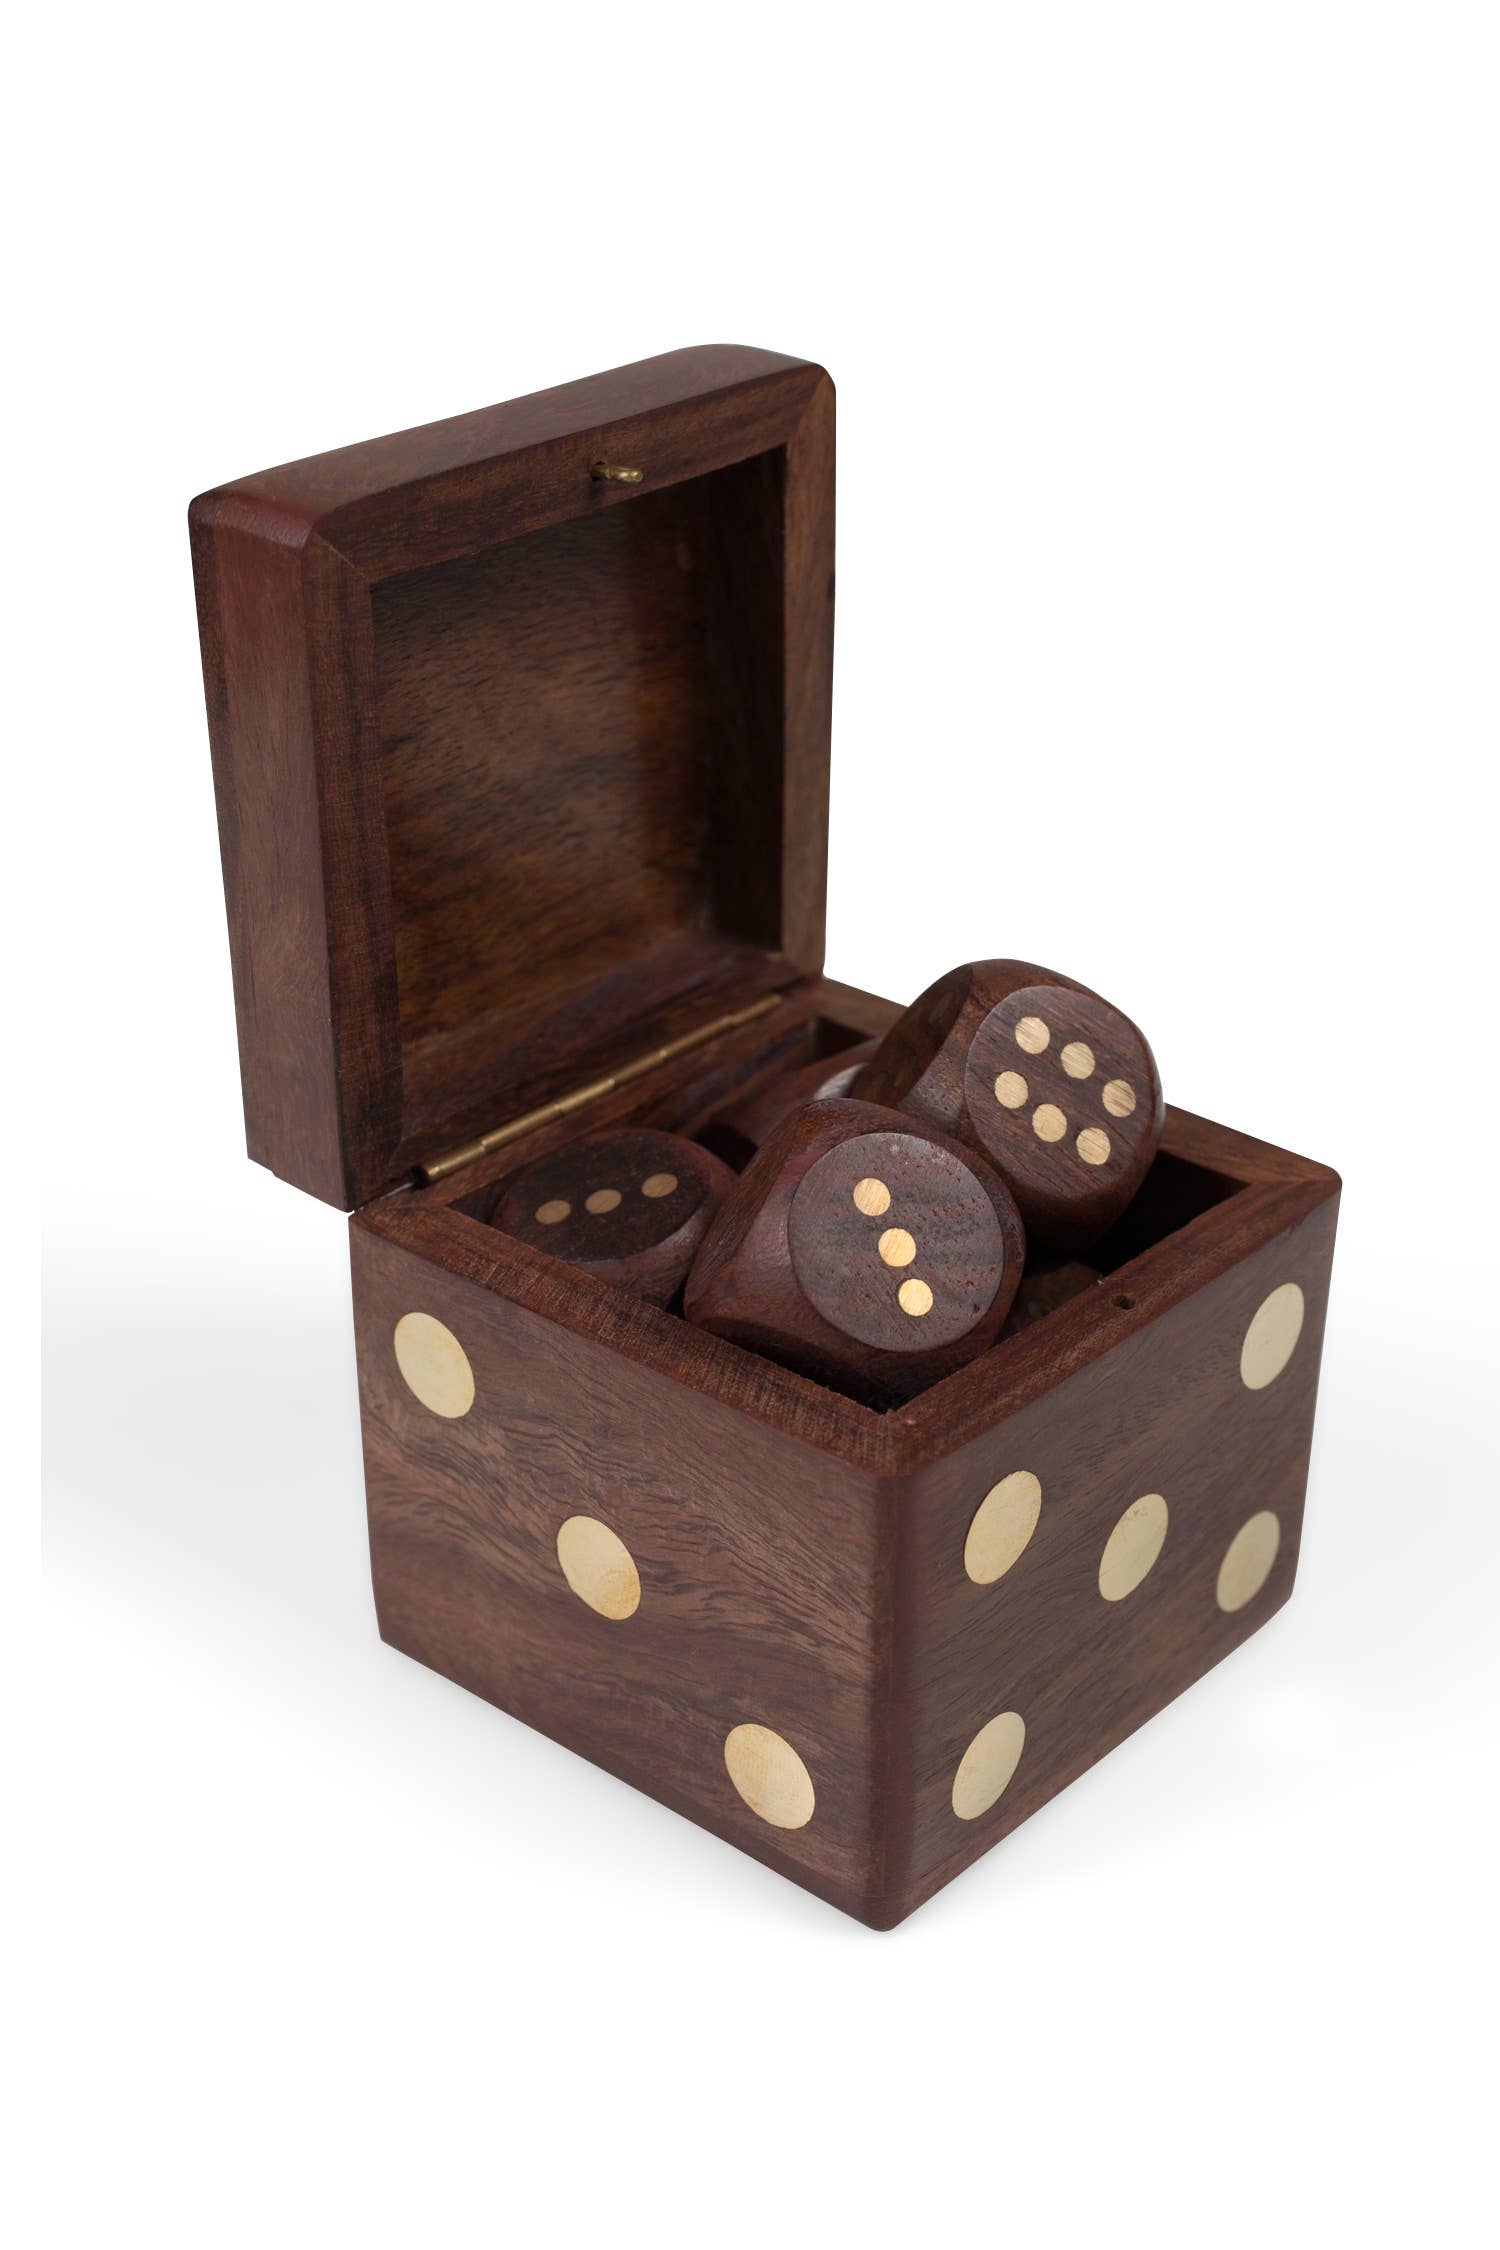 Dice Box Handcrafted